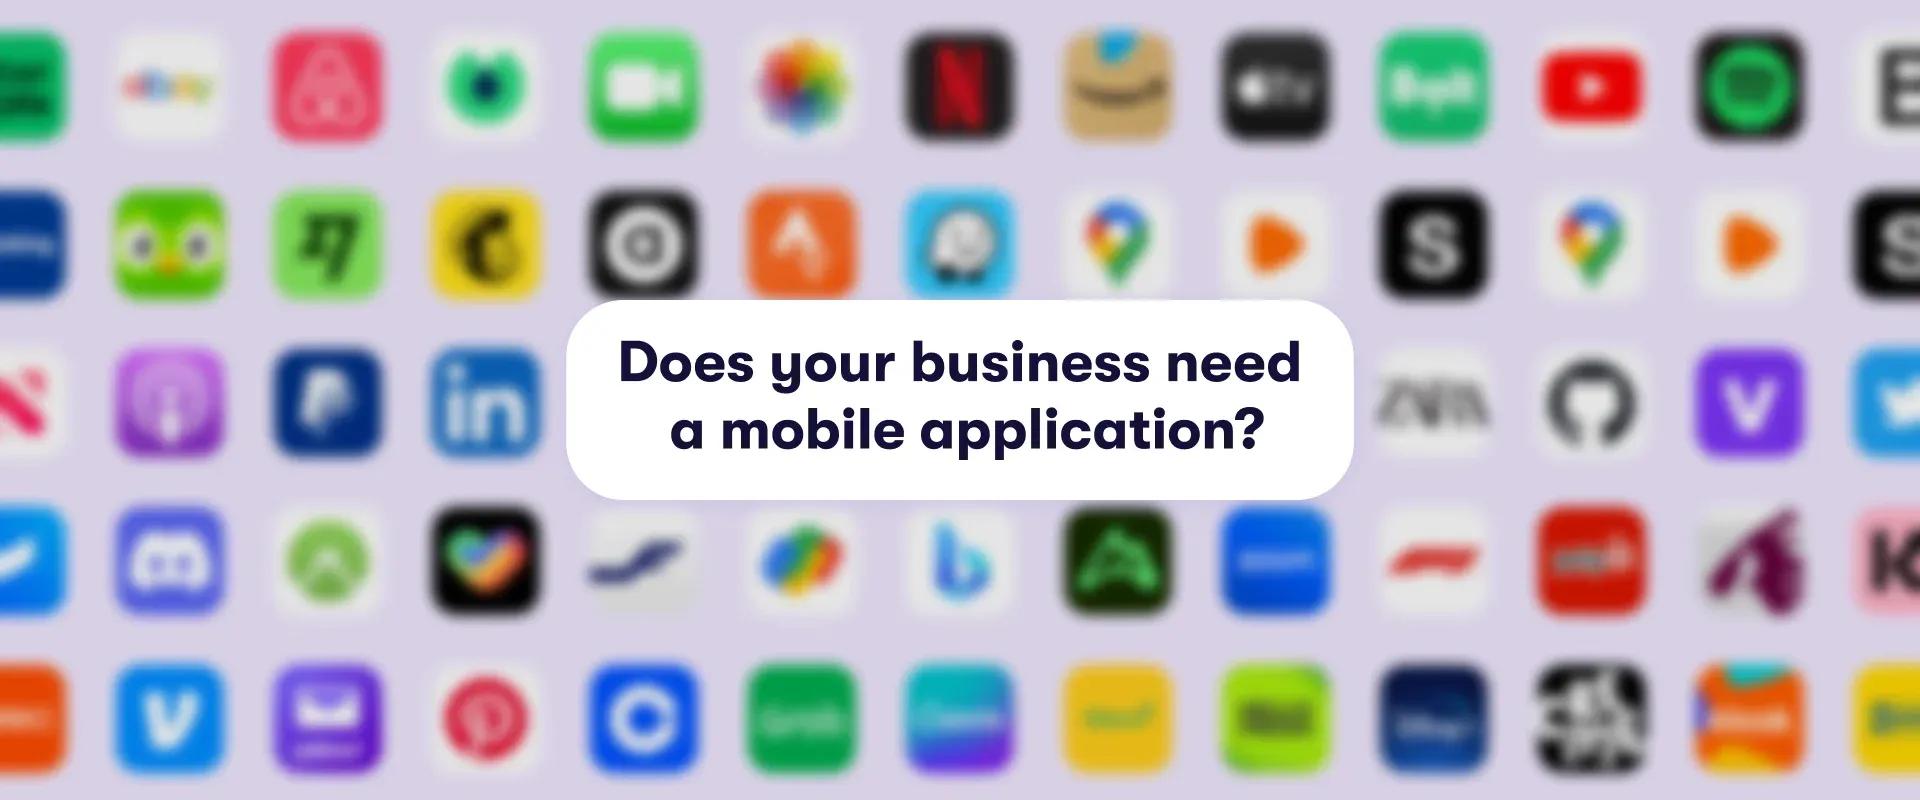 Does your business need a mobile application? 